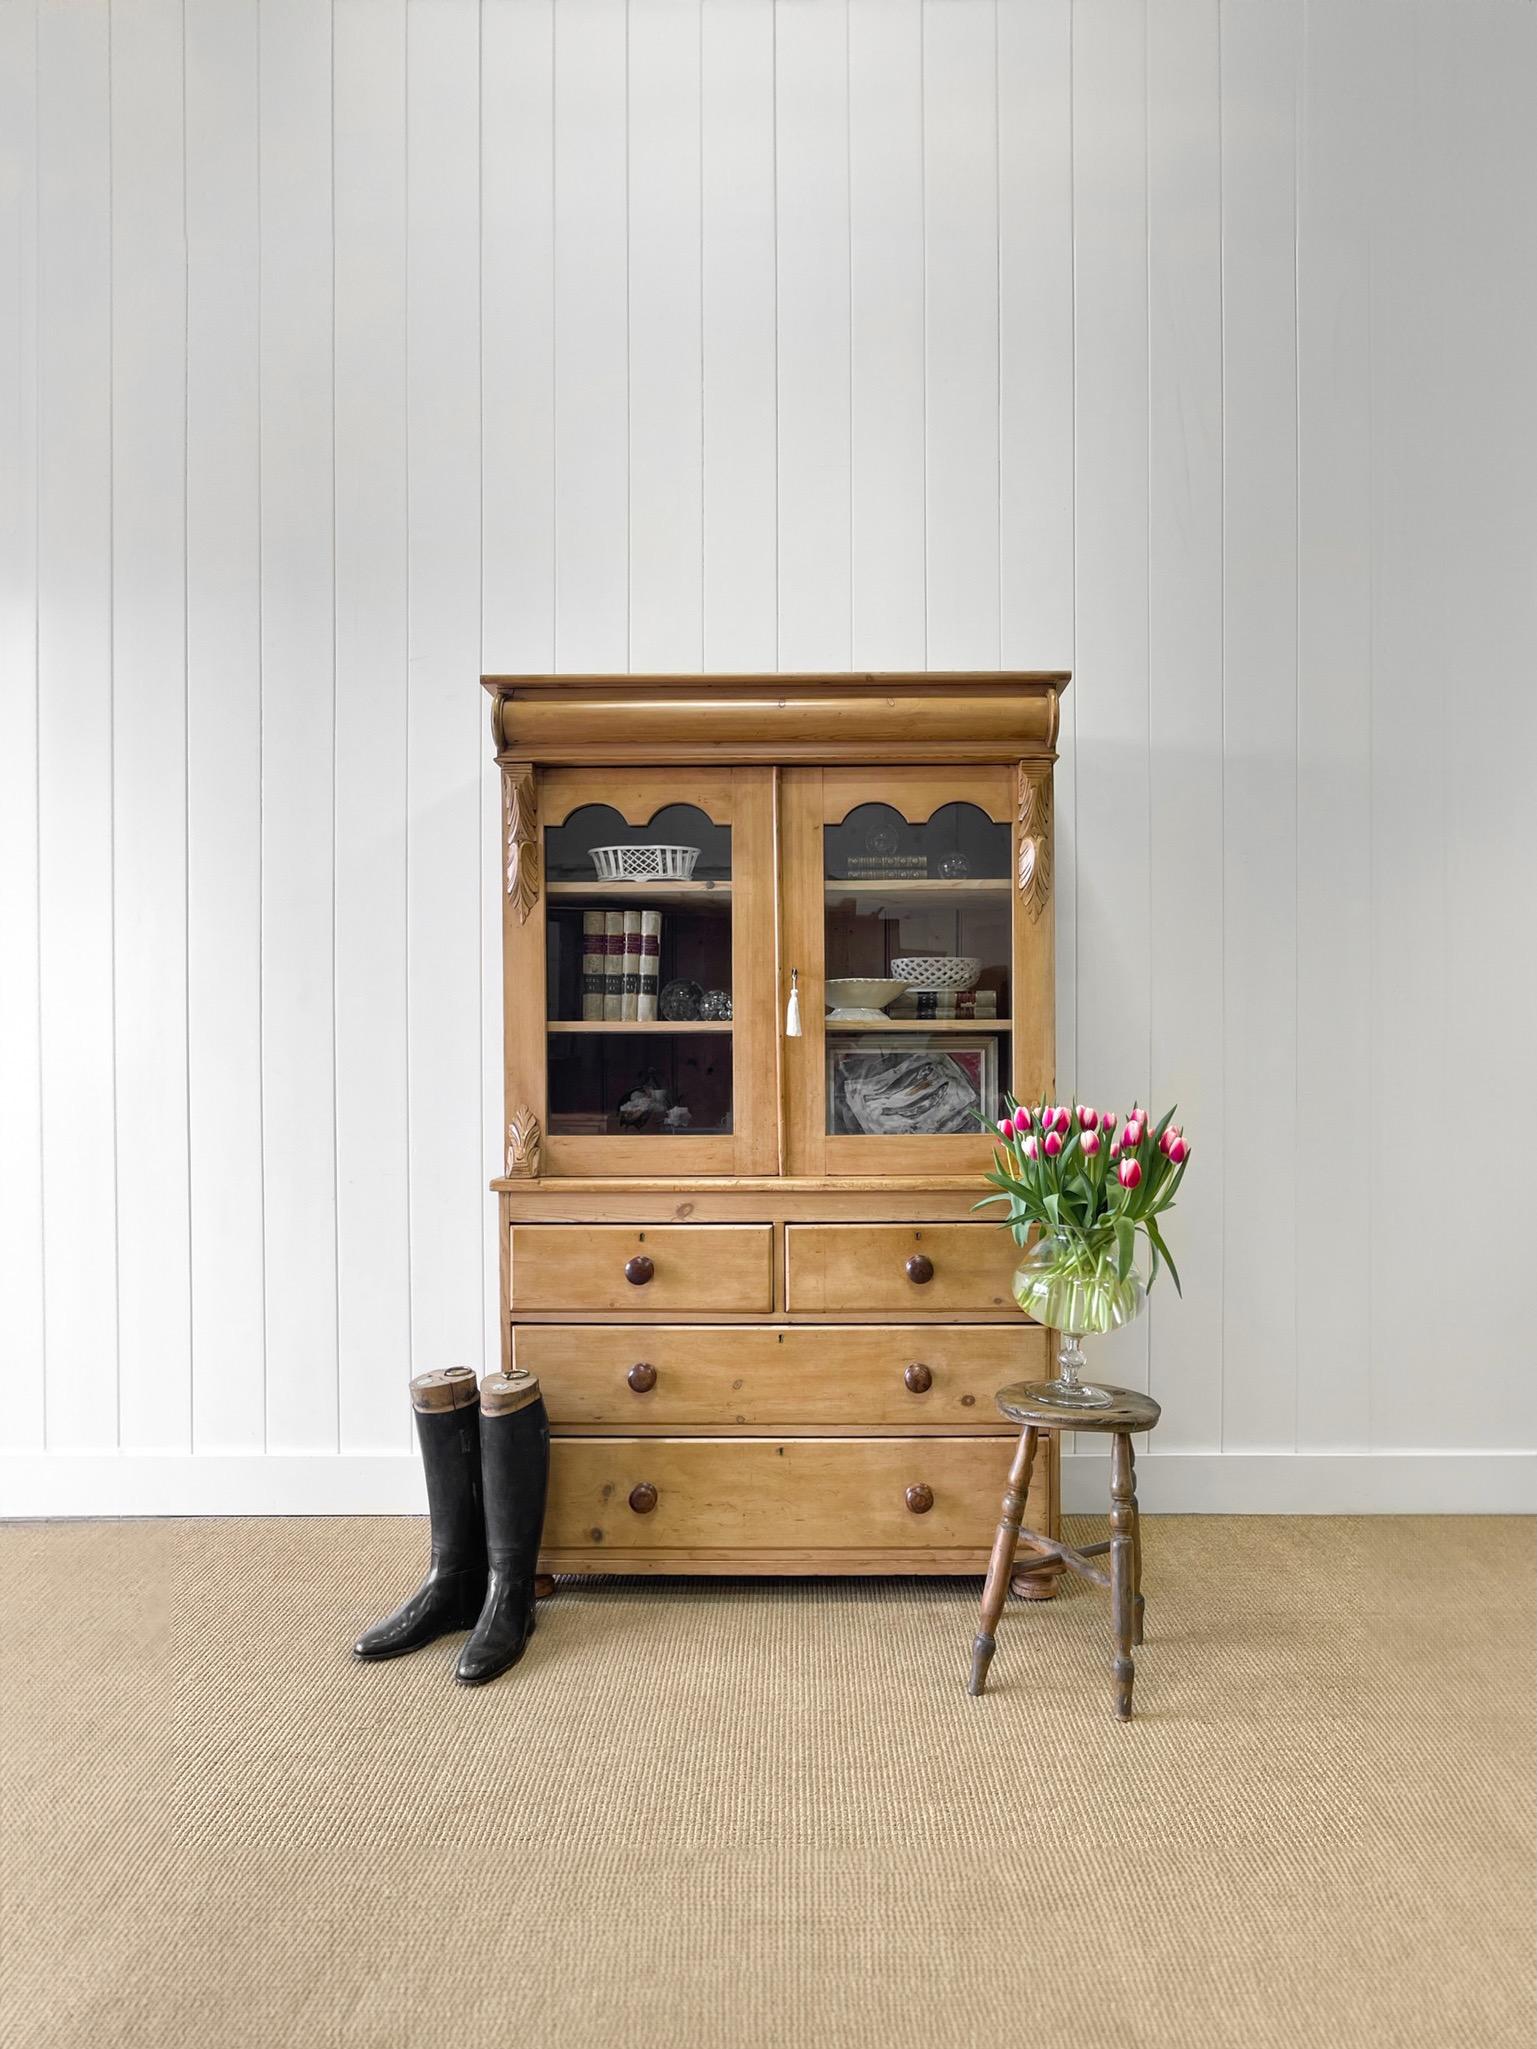 A lovely antique English pine bookcase cabinet or hutch.  The top portion of this piece has 2 glass doors that open to reveal ample shelving.  The lower cupboard has four drawers for additional storage space.  This is a very elegant and pleasing